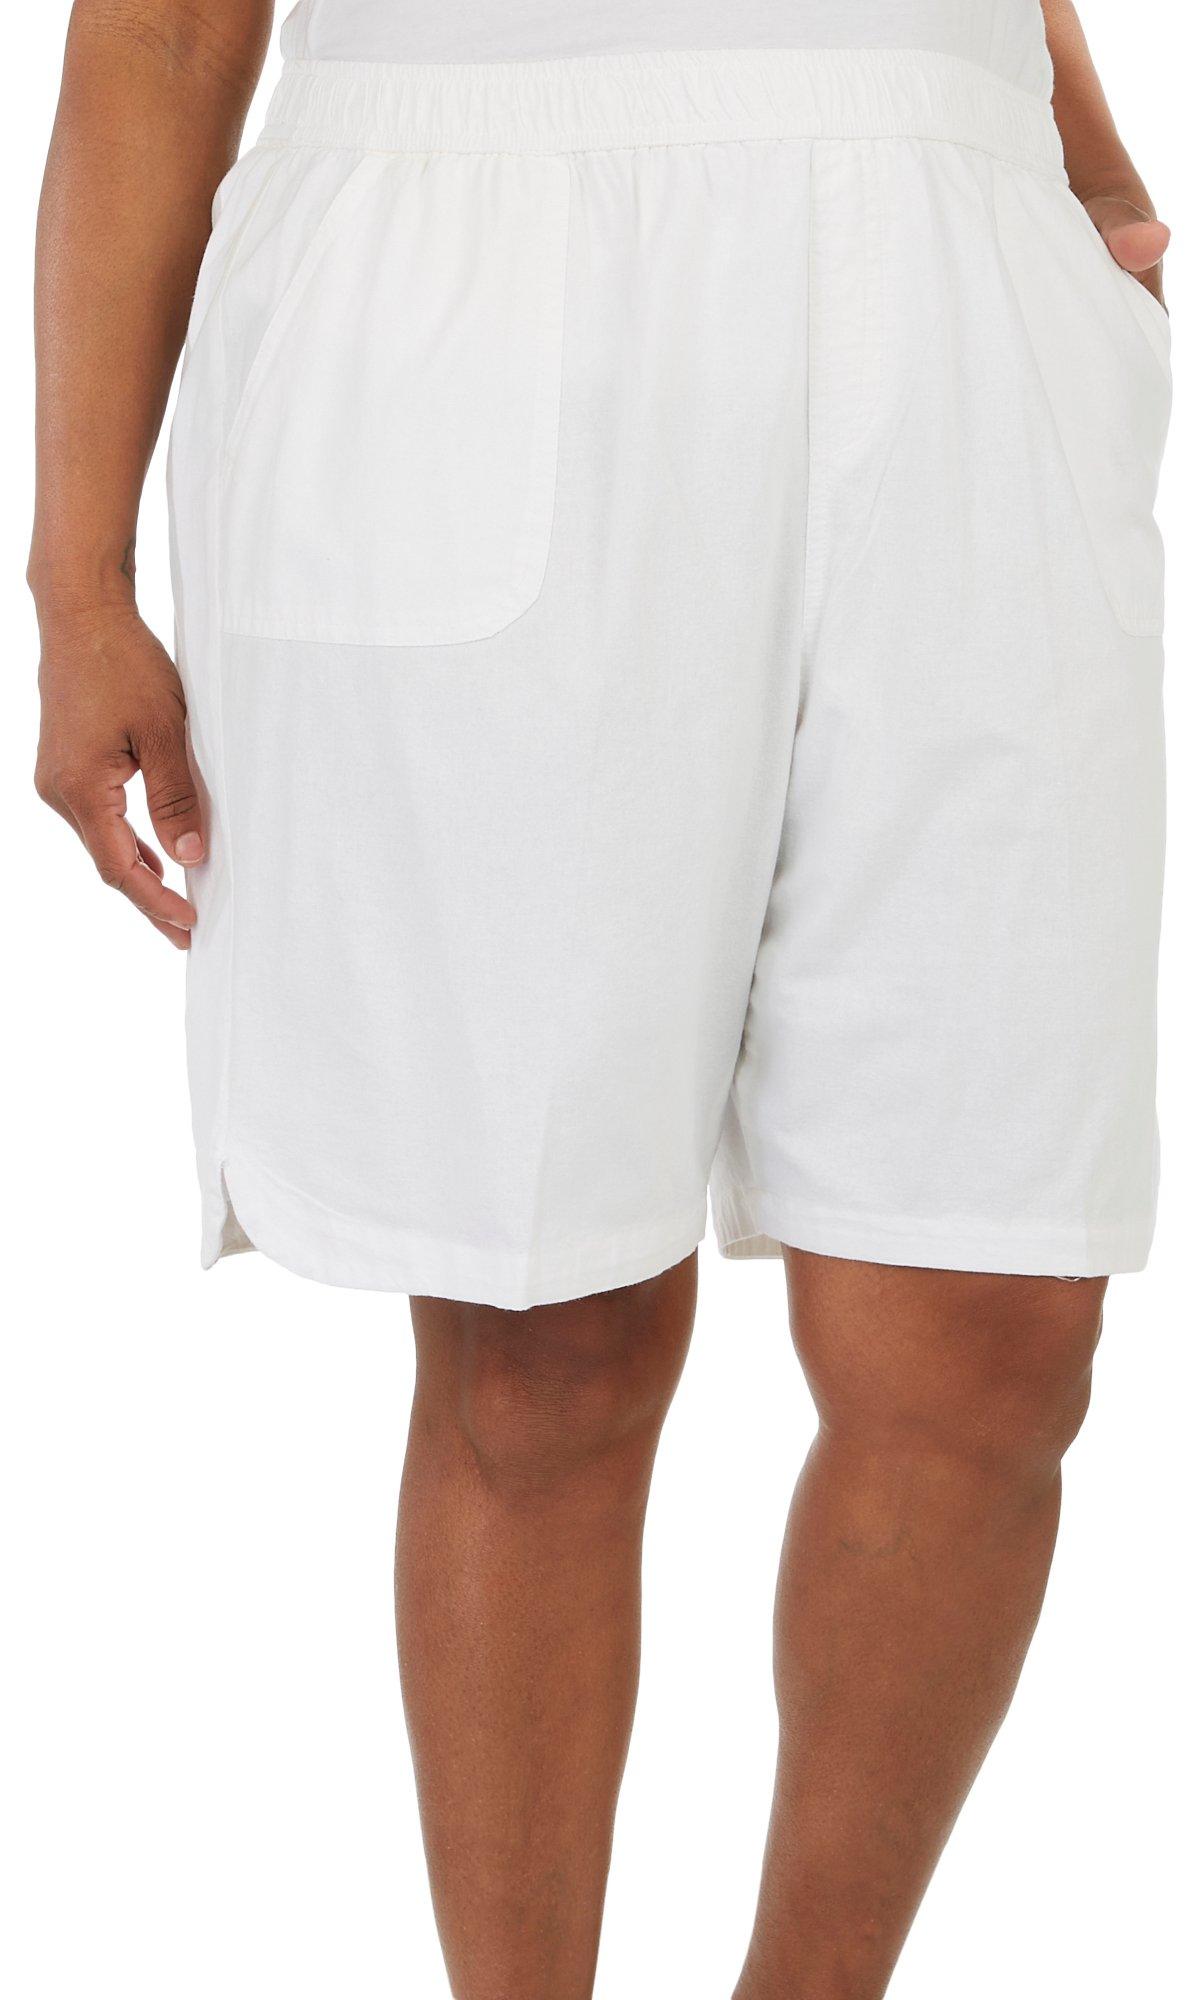 Coral Bay Plus 9 in. Solid Woven Shorts